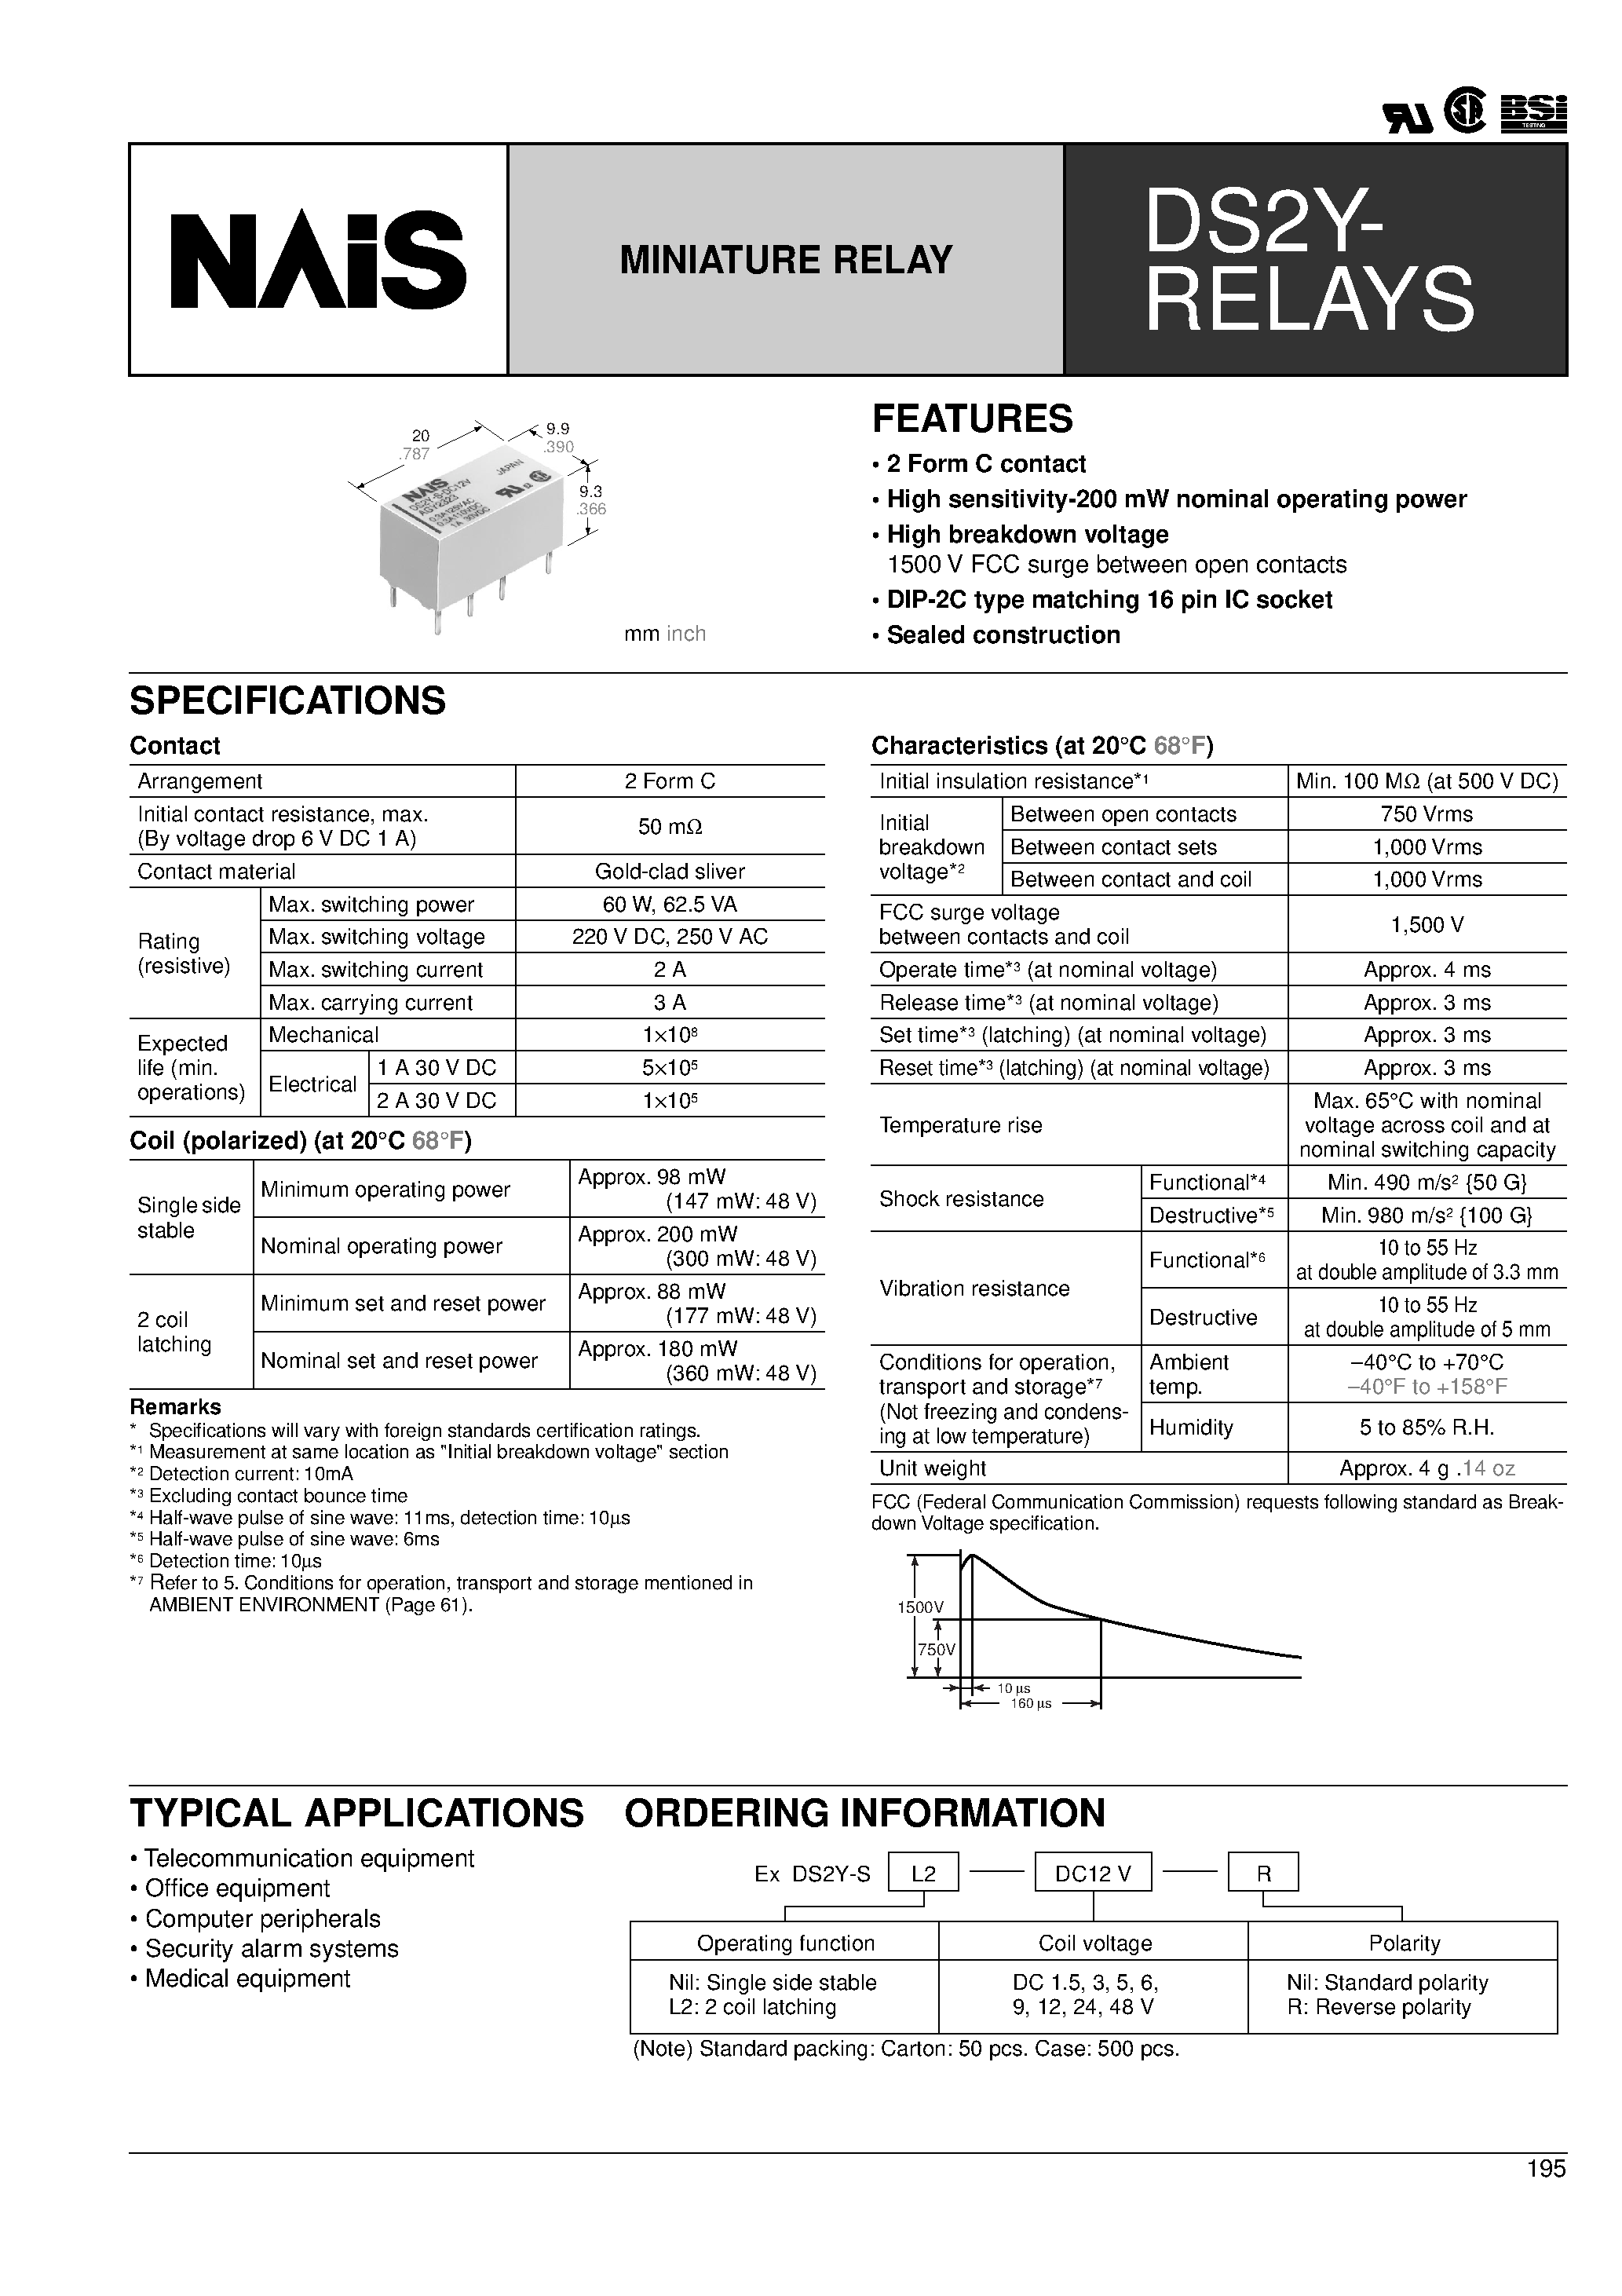 Datasheet DS2Y-SL2-DC9V - 2 Form C contact High sensitivity-200 mW nominal operating power page 1